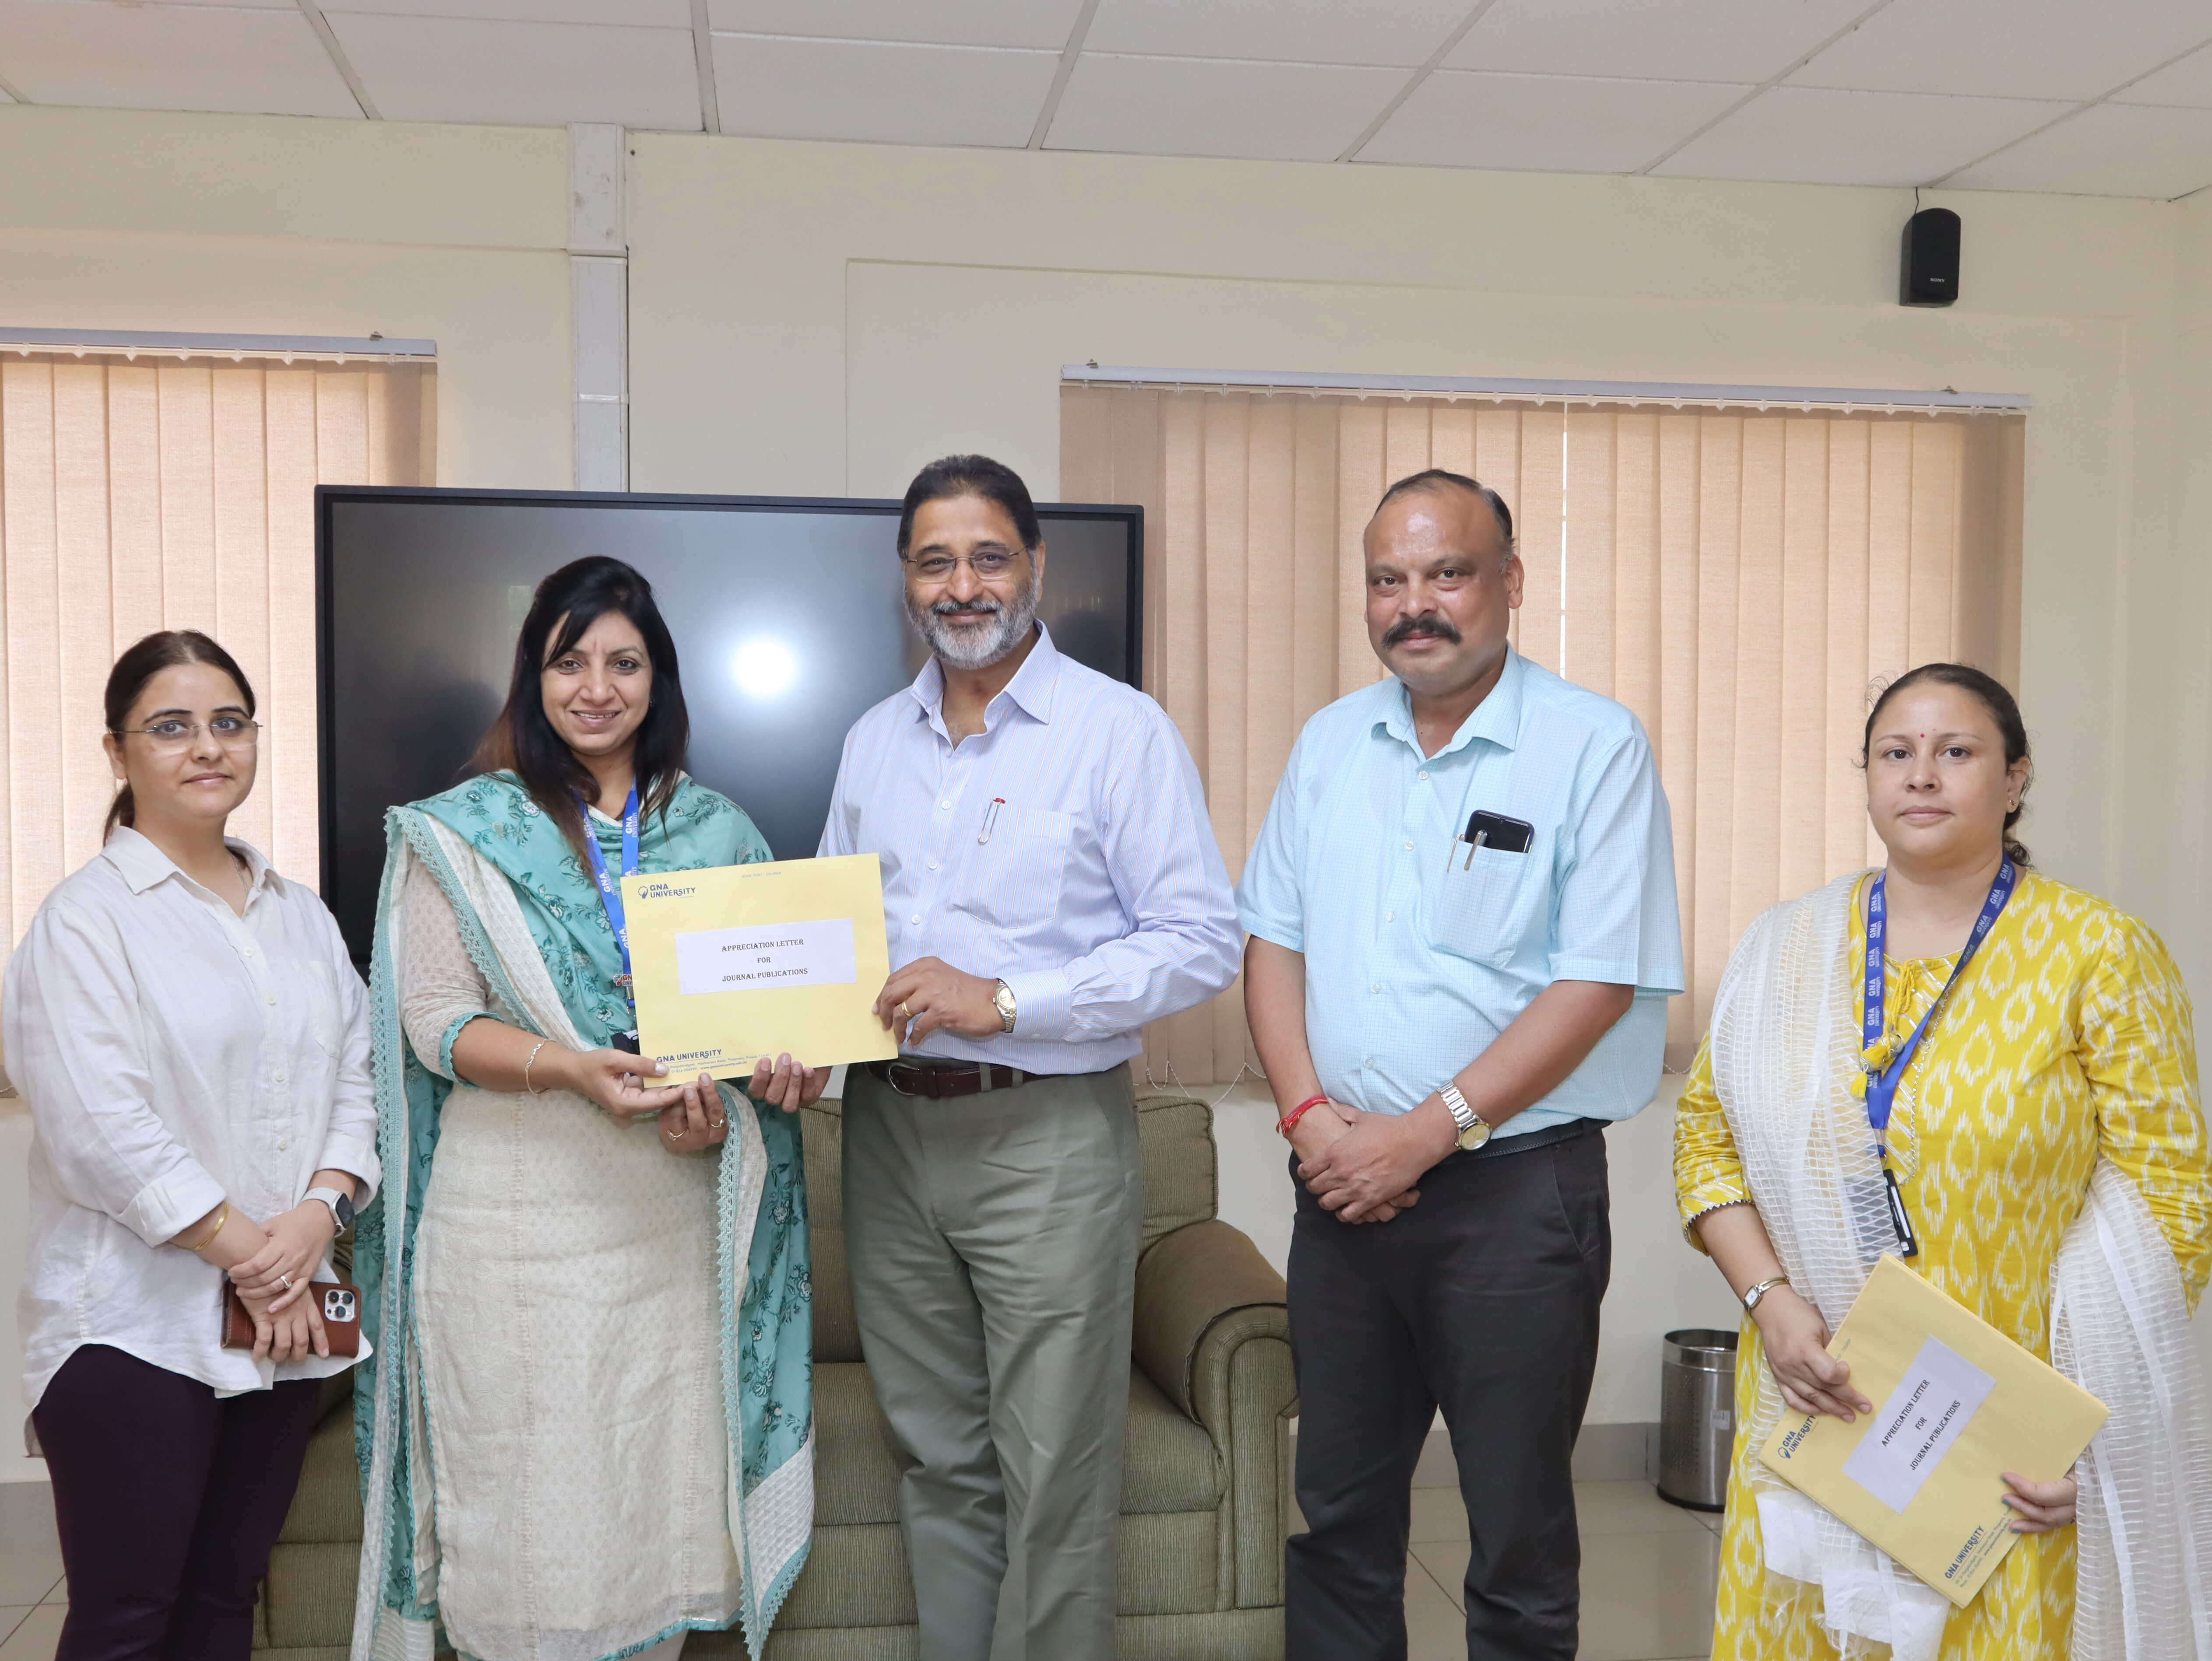 Faculty @ GNA University Awarded with Appreciation Letters & Monetary Benefits for Scopus/WOS Journal Publications